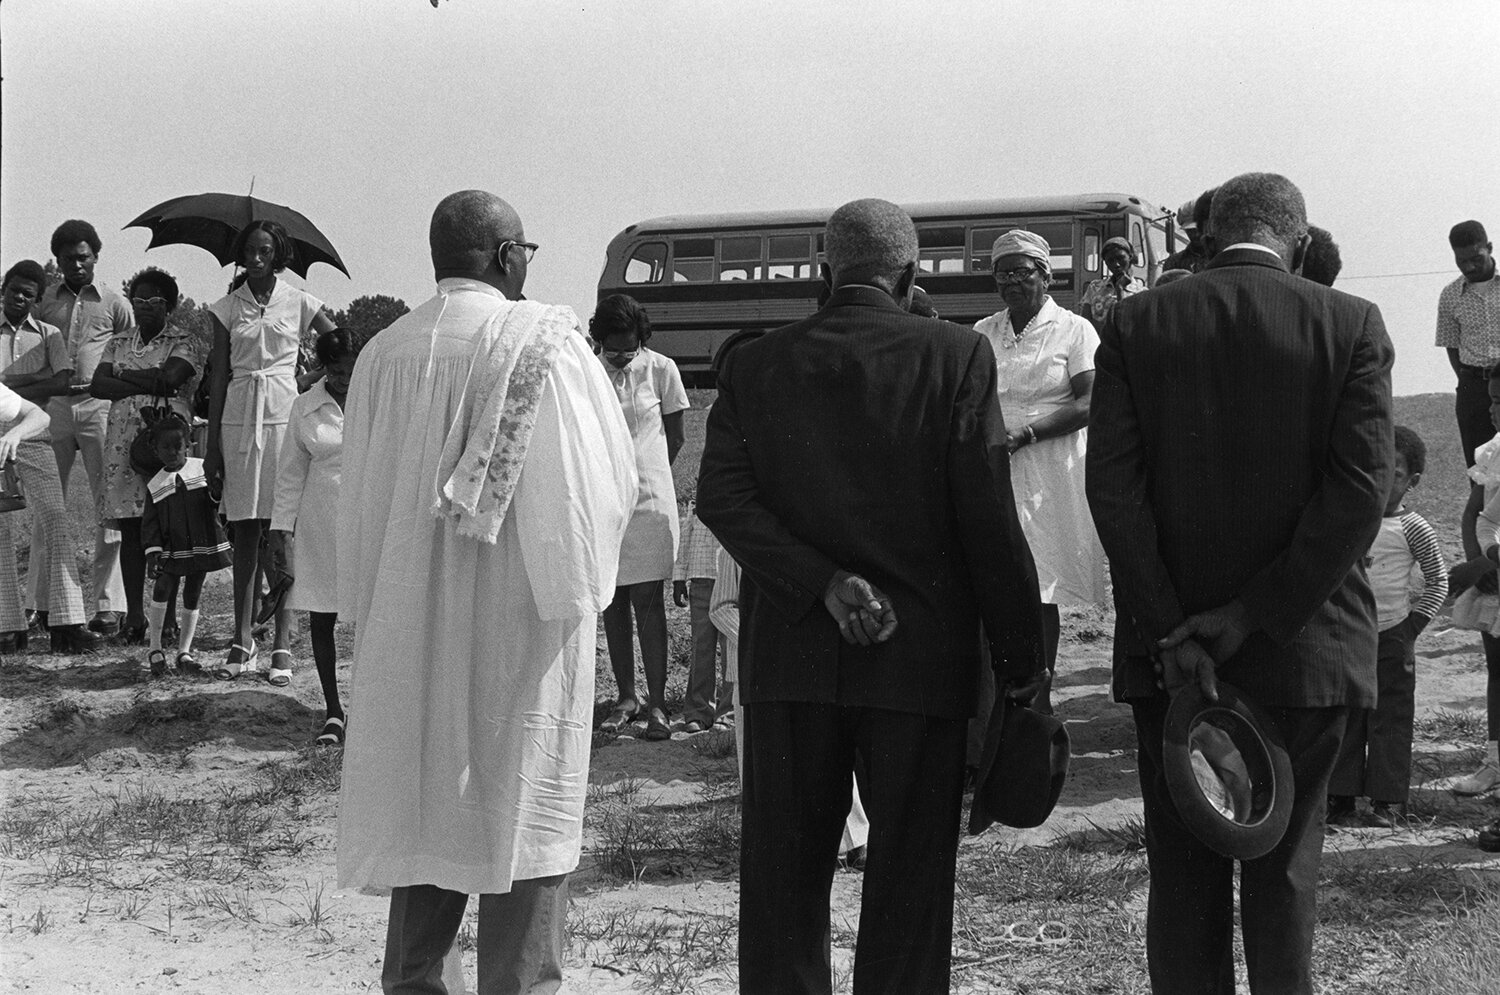   Mt. Zuma baptism in the Flint River , 1977 Silver Gelatin Print 11 x 14 in. (Paper size) The Do Good Fund, Inc., 2017-057 